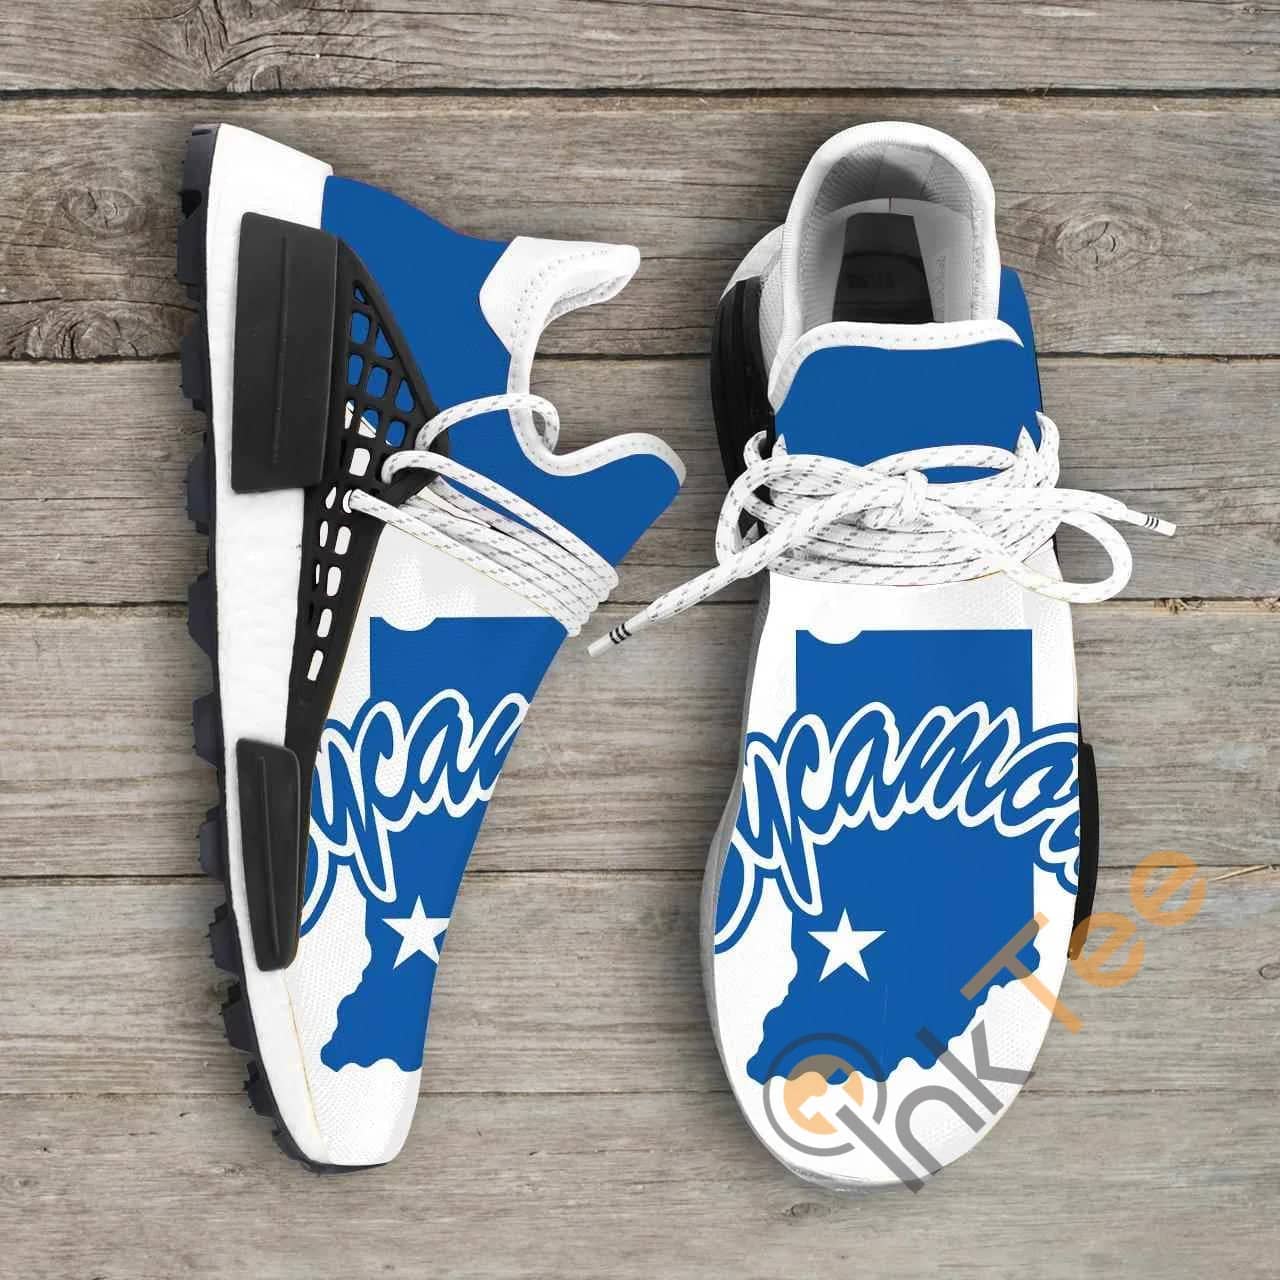 Indiana State University Ncaa Nmd Human Shoes